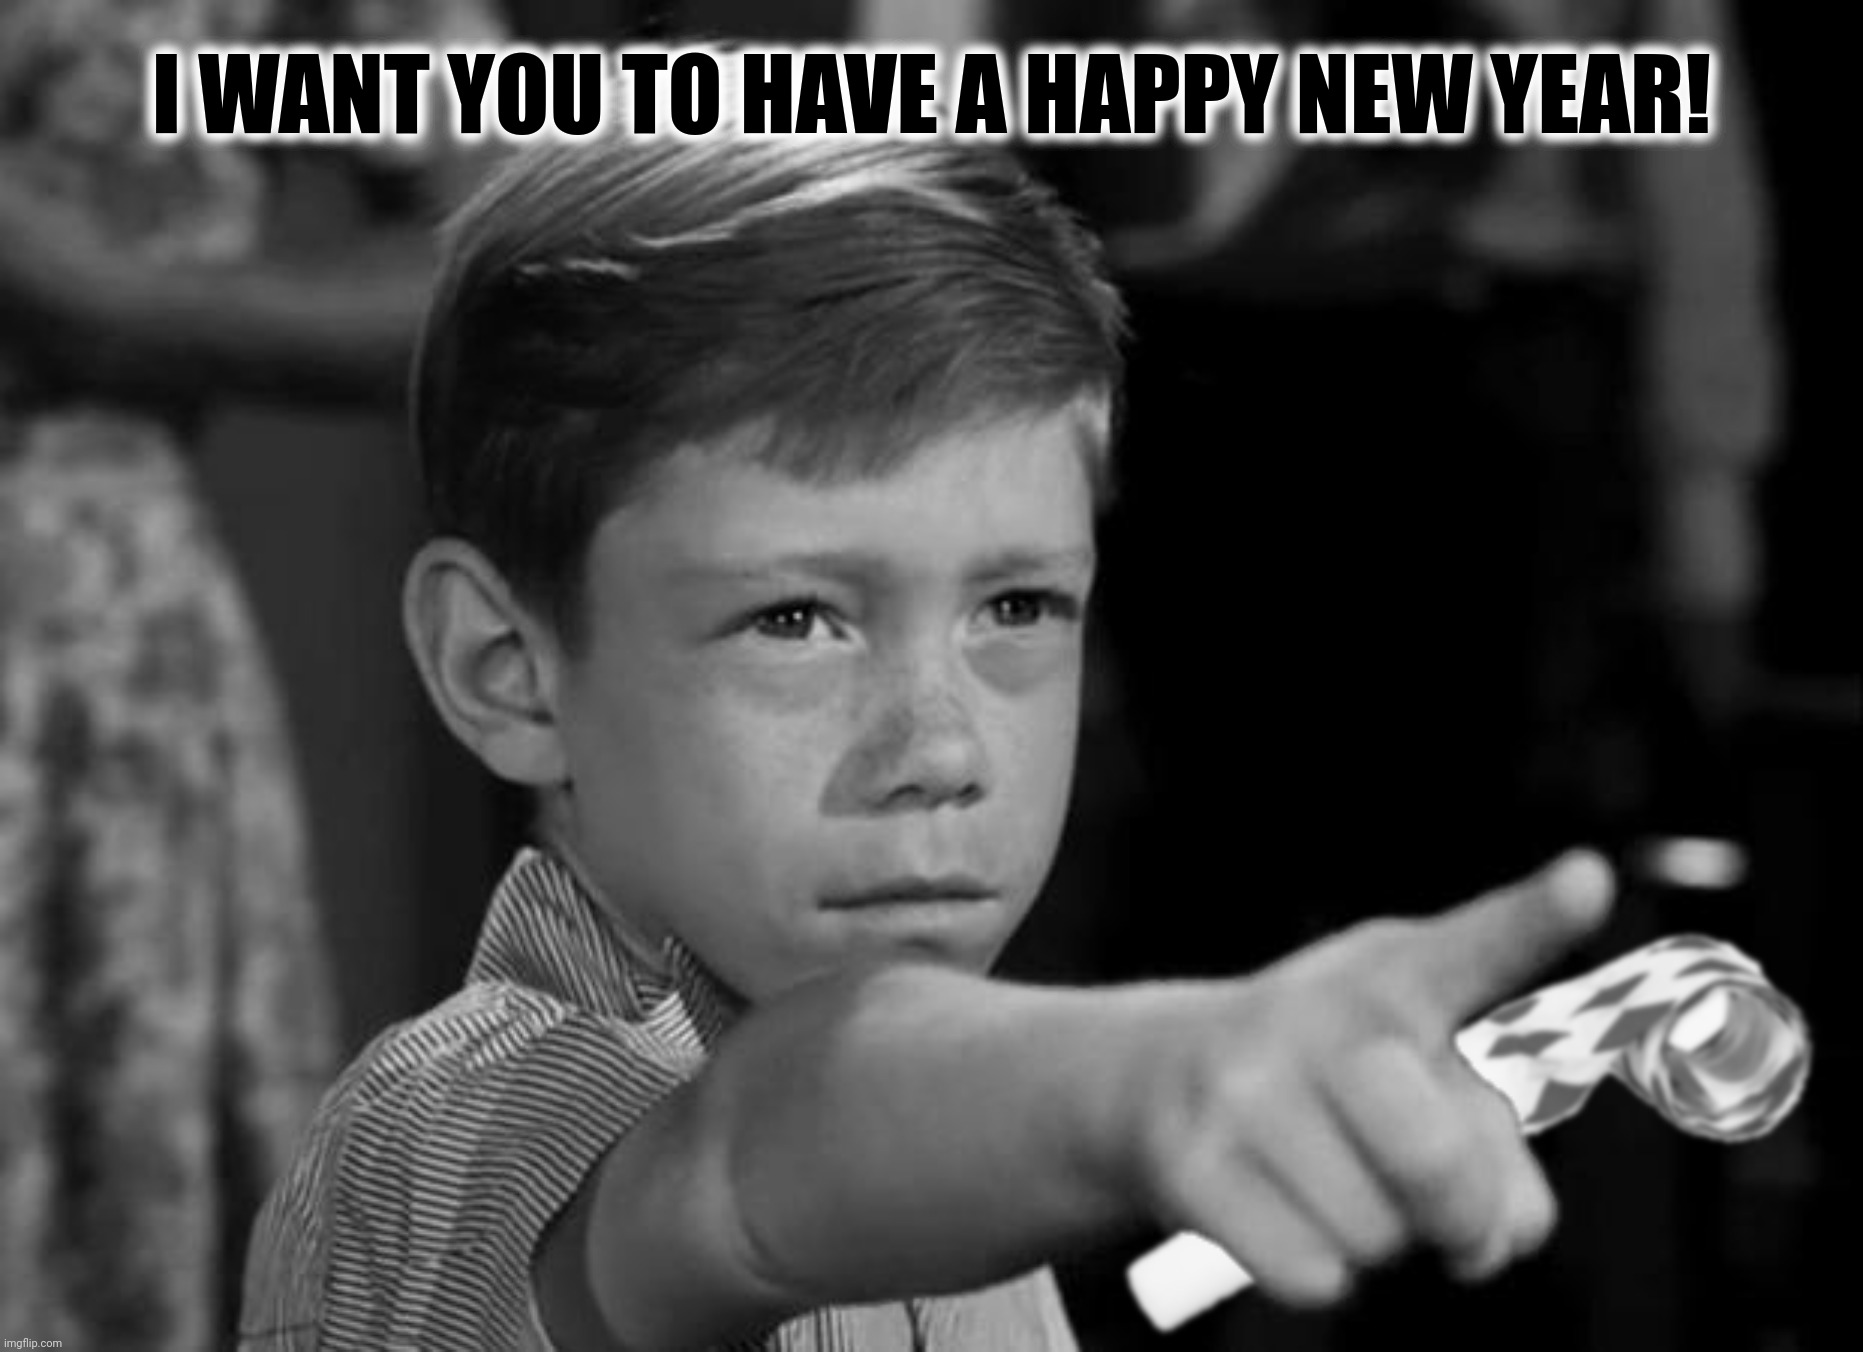 I WANT YOU TO HAVE A HAPPY NEW YEAR! | made w/ Imgflip meme maker